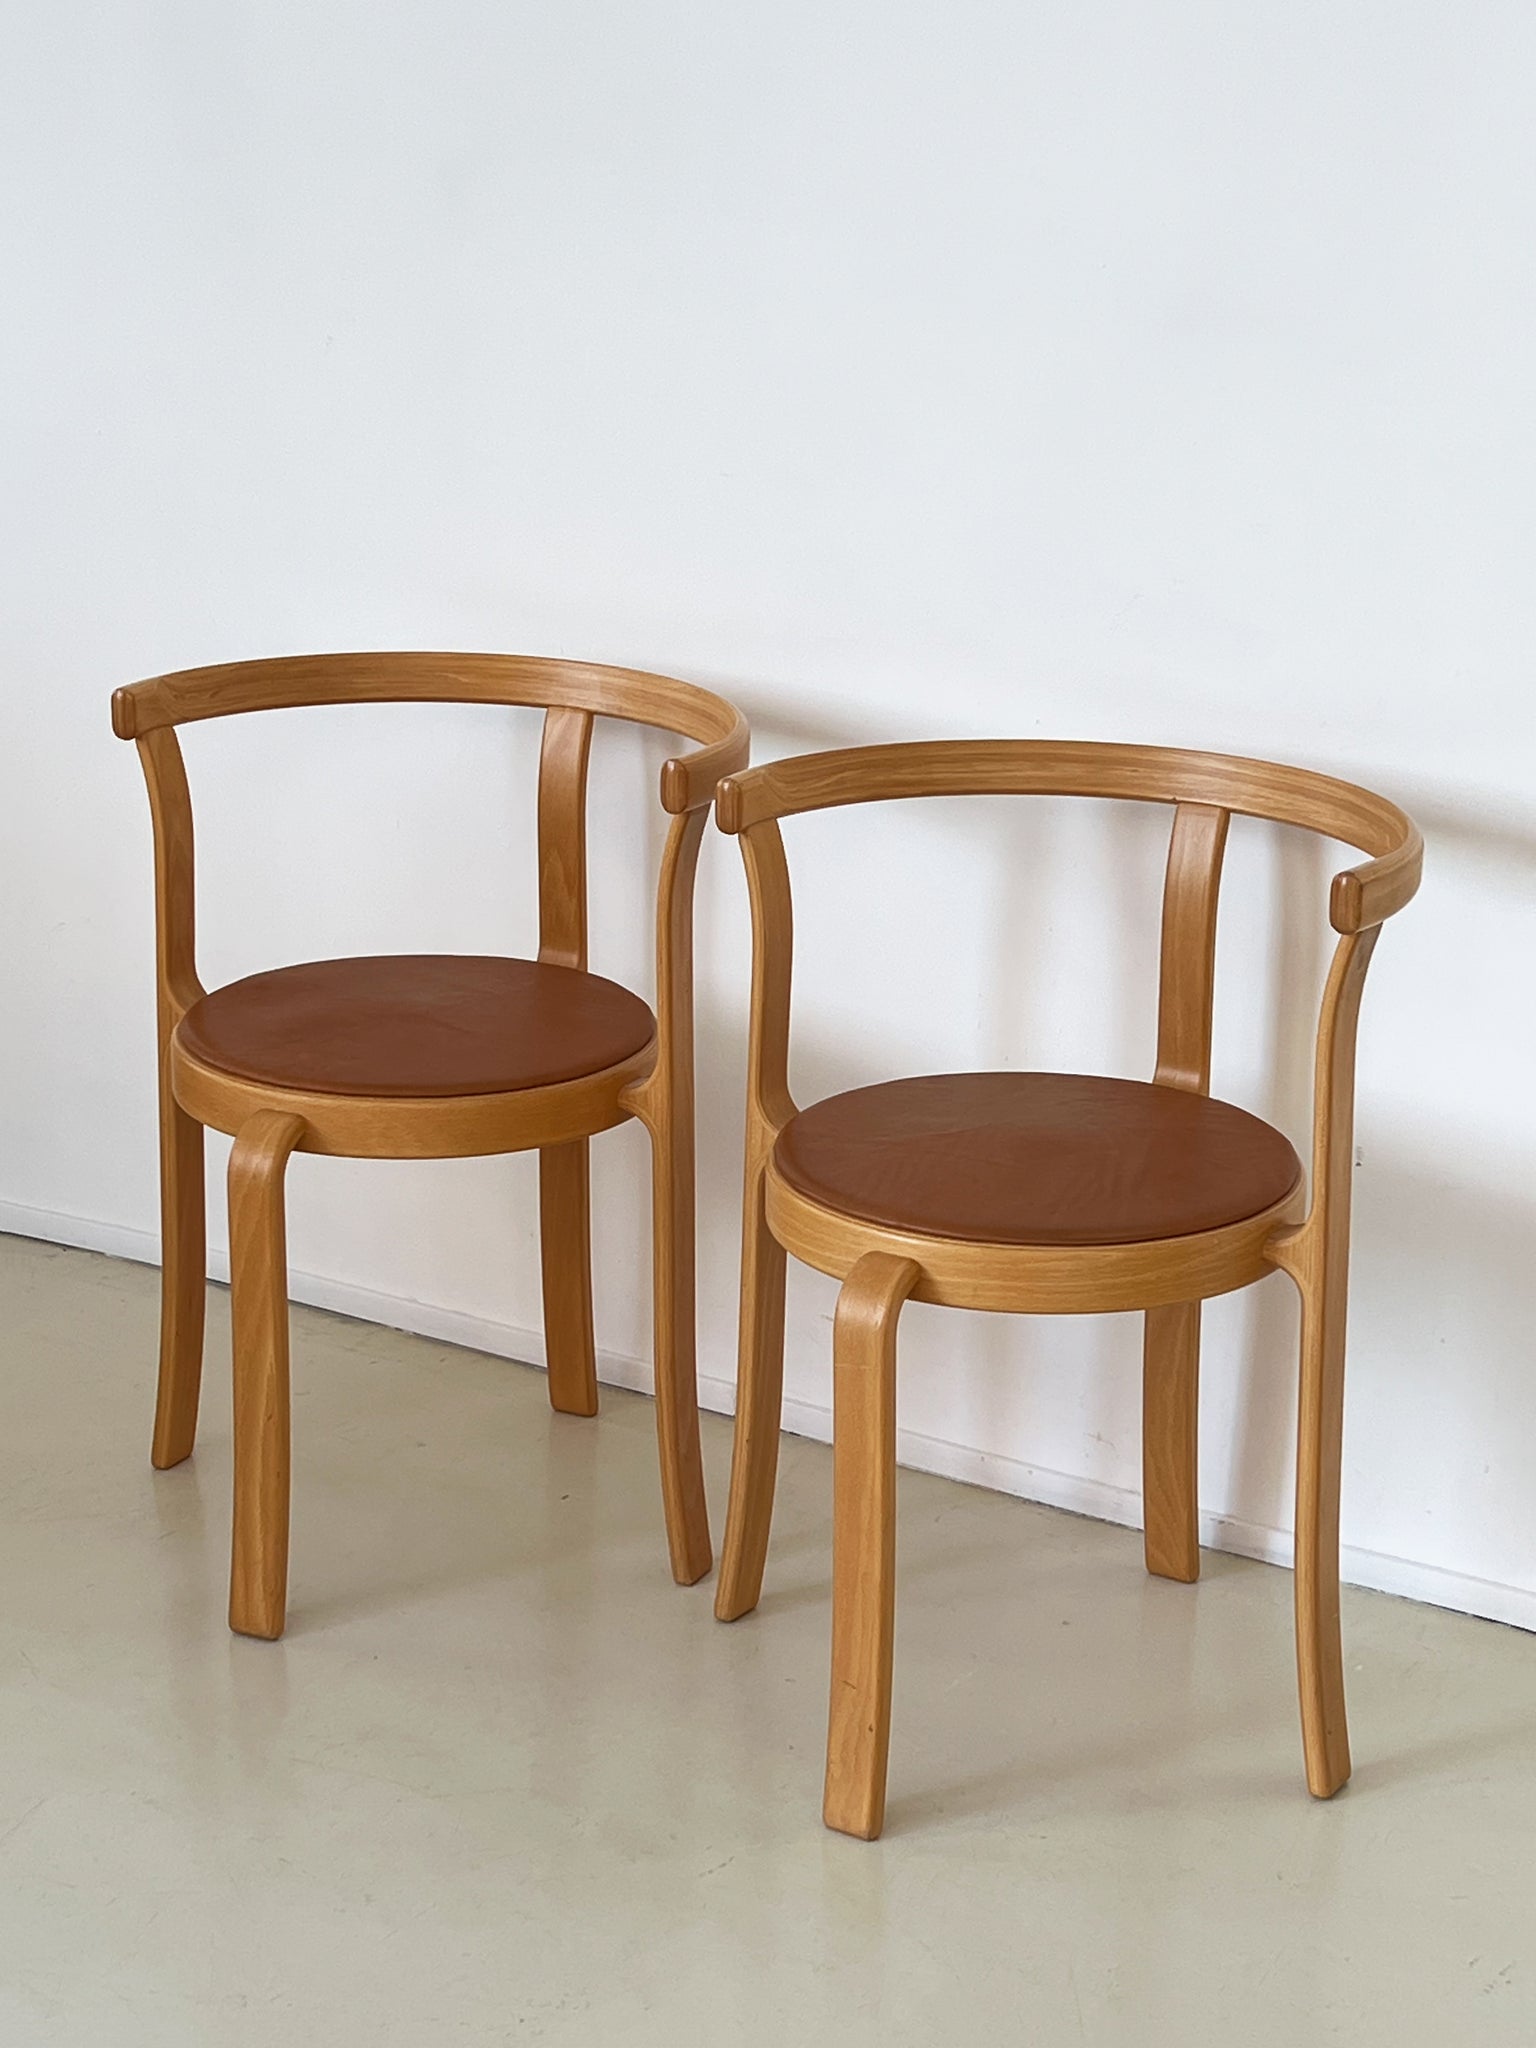 Pair of Series 8000 1980s Beechwood and Leather Dining Chairs, Denmark